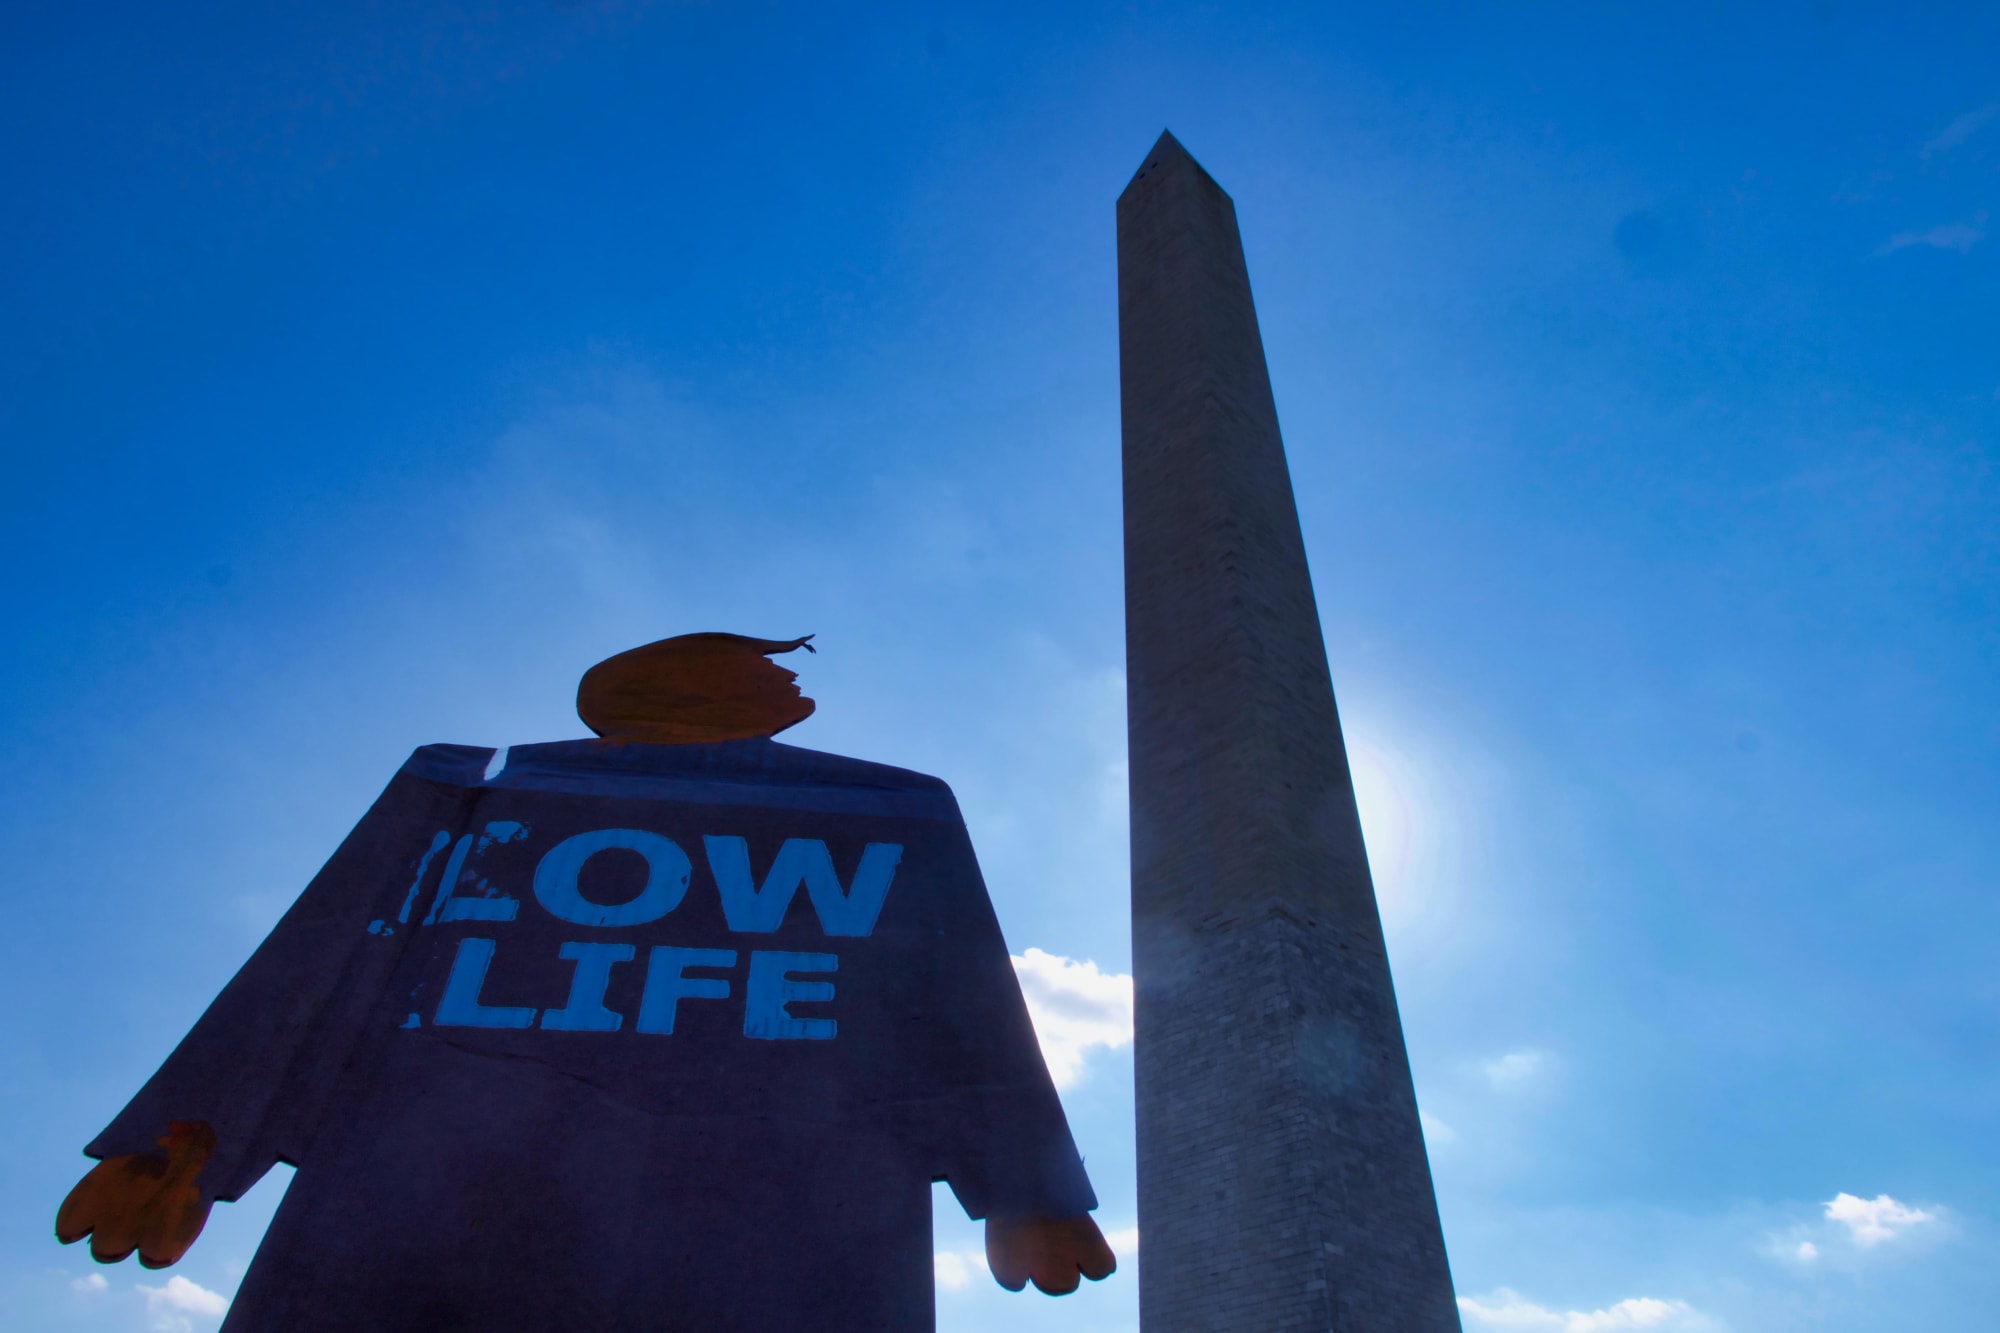 A two foot tall cardboard cutout tiny trump protest sign with the slogan Low Life looking up at the Washington Monument in Washington, D.C. Photograph angle is pointed up sharply so only the tiny trump, monument, and sky are visible